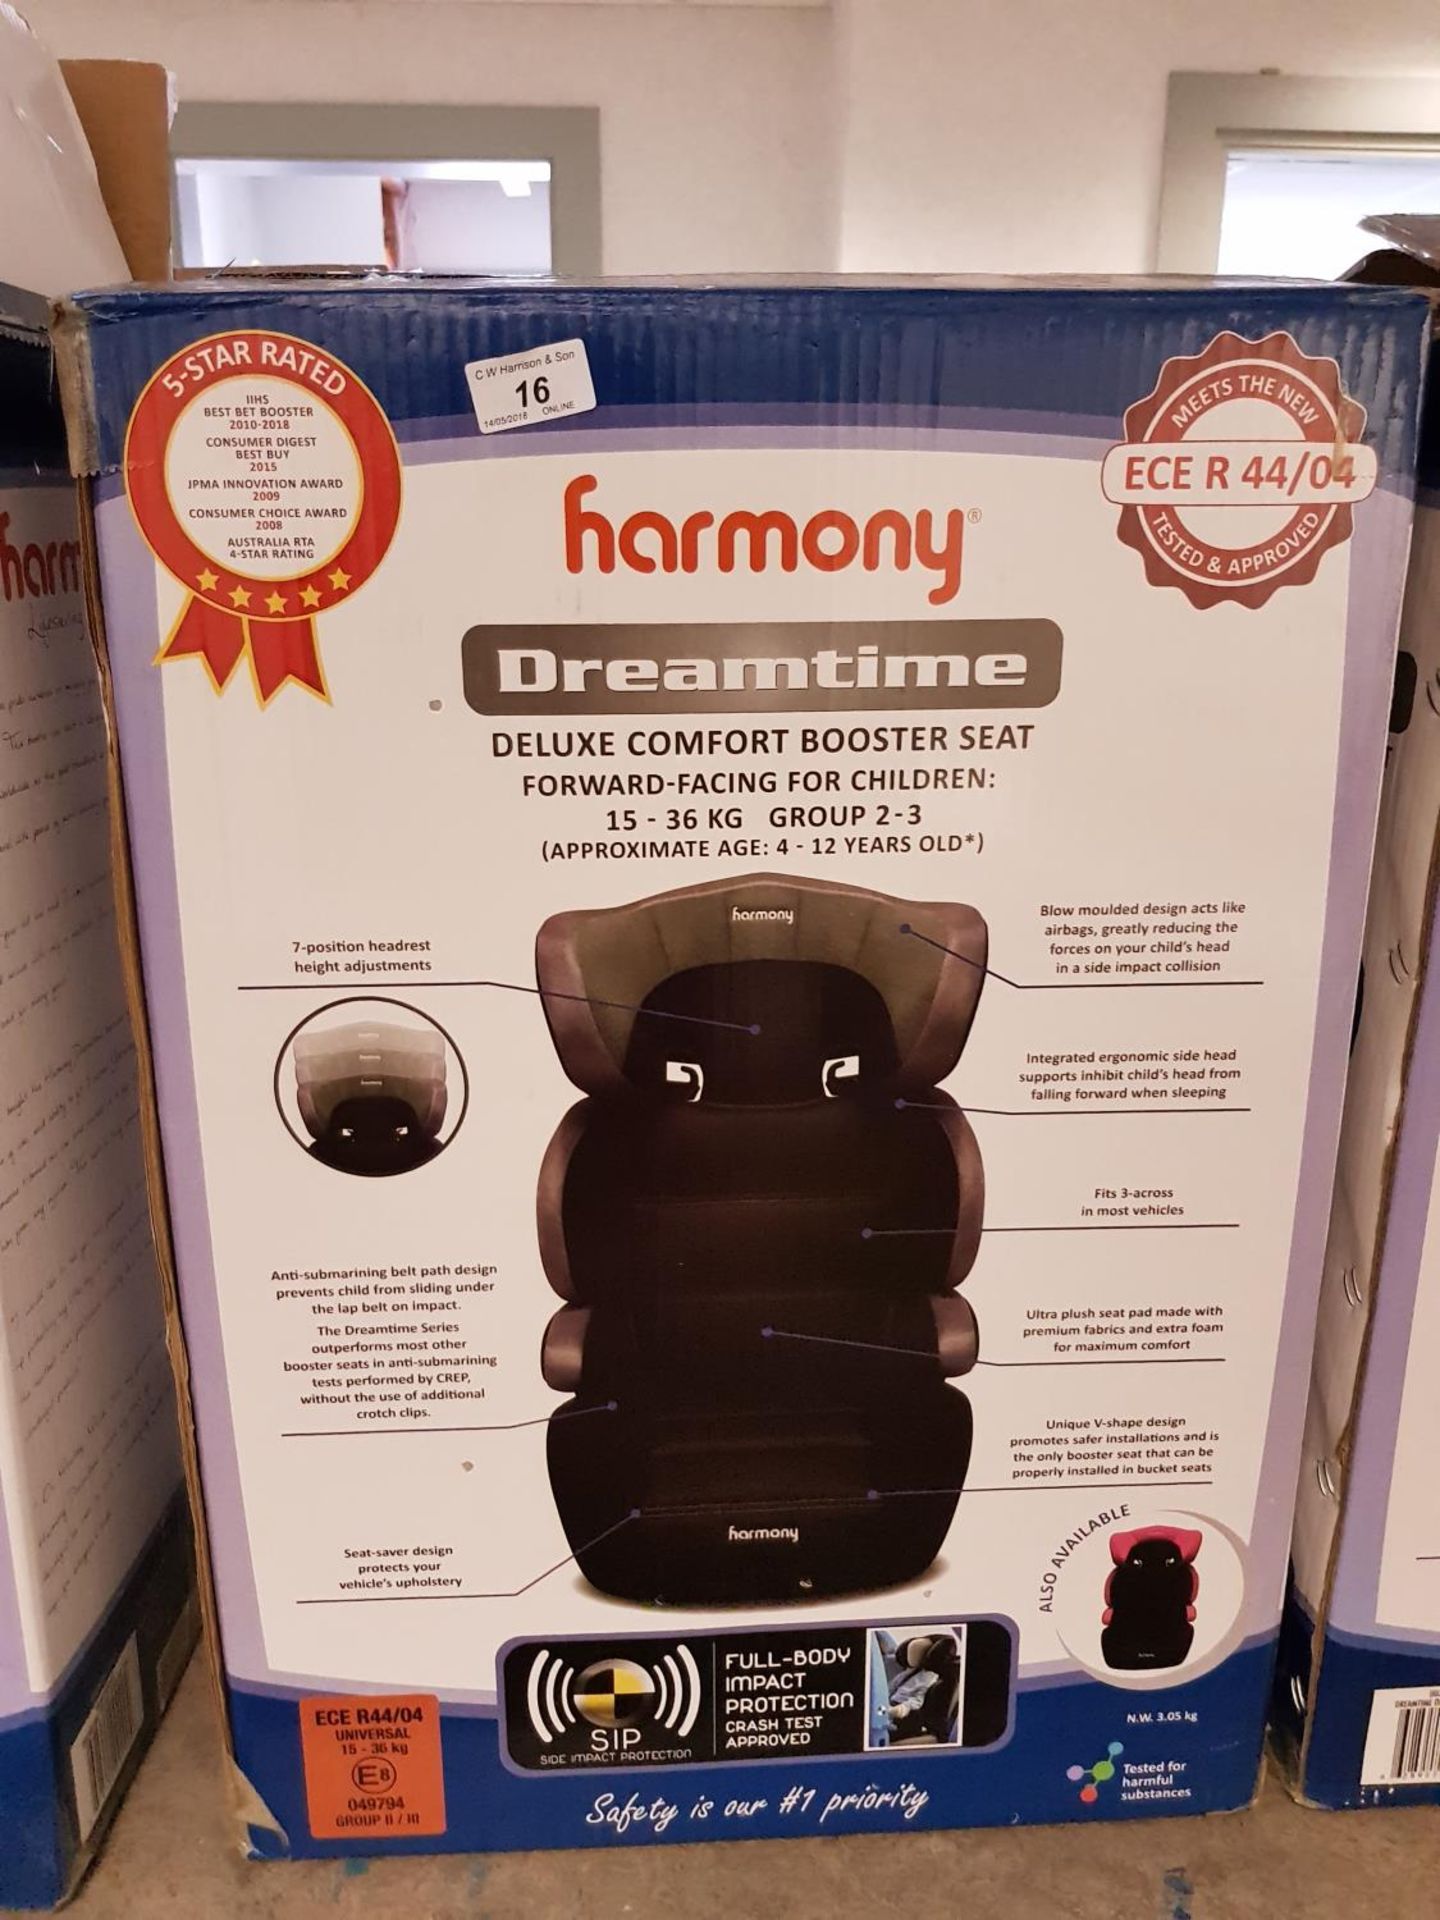 Harmony Dreamtime Deluxe Comfort Booster